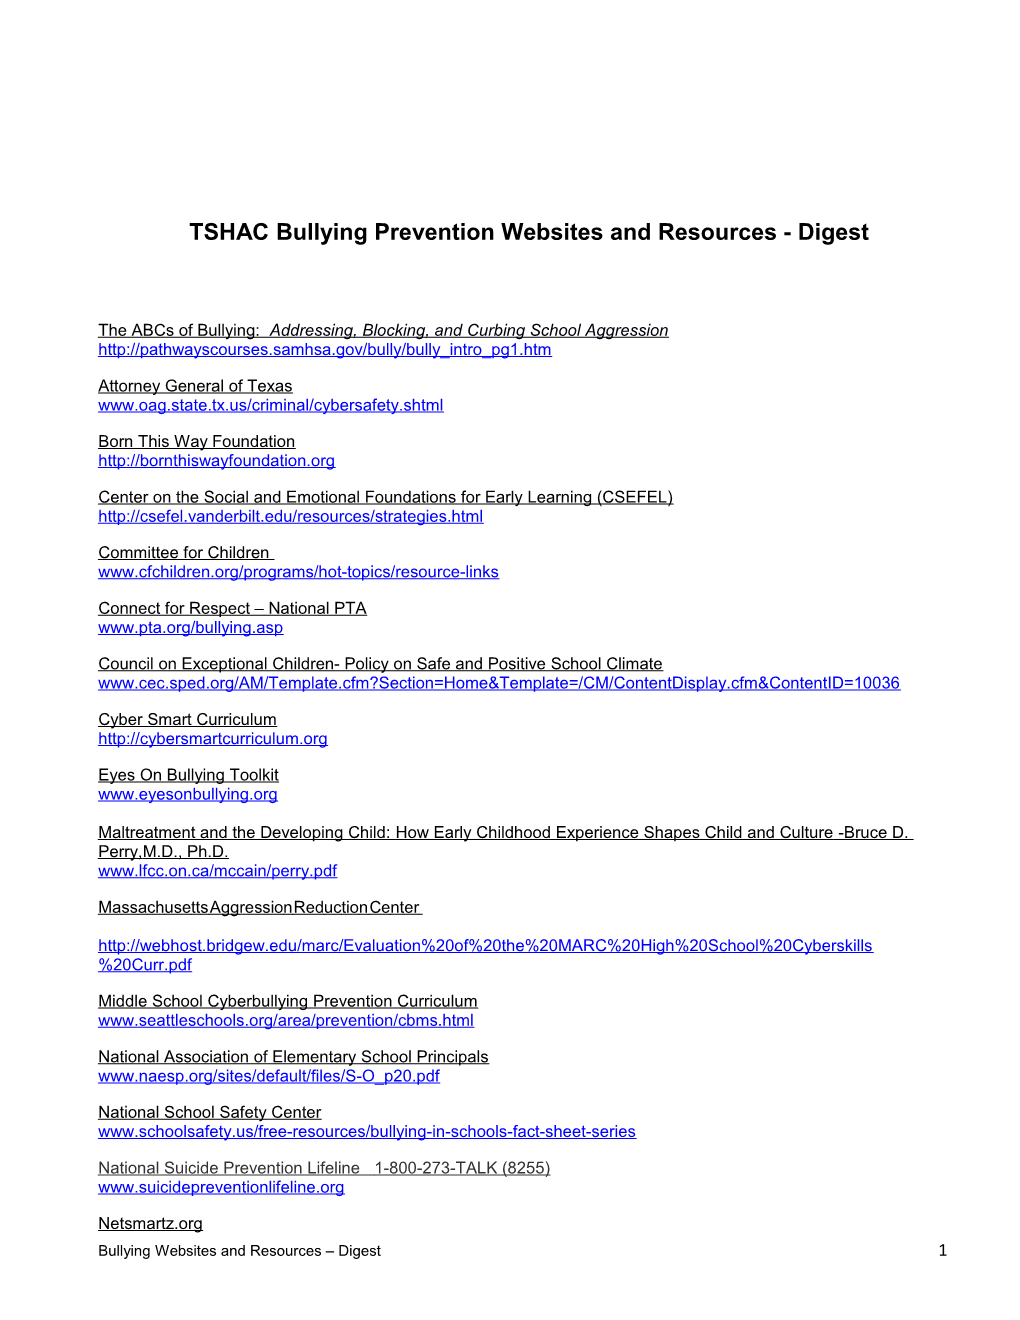 TSHAC Bullying Prevention Websites and Resources- Digest